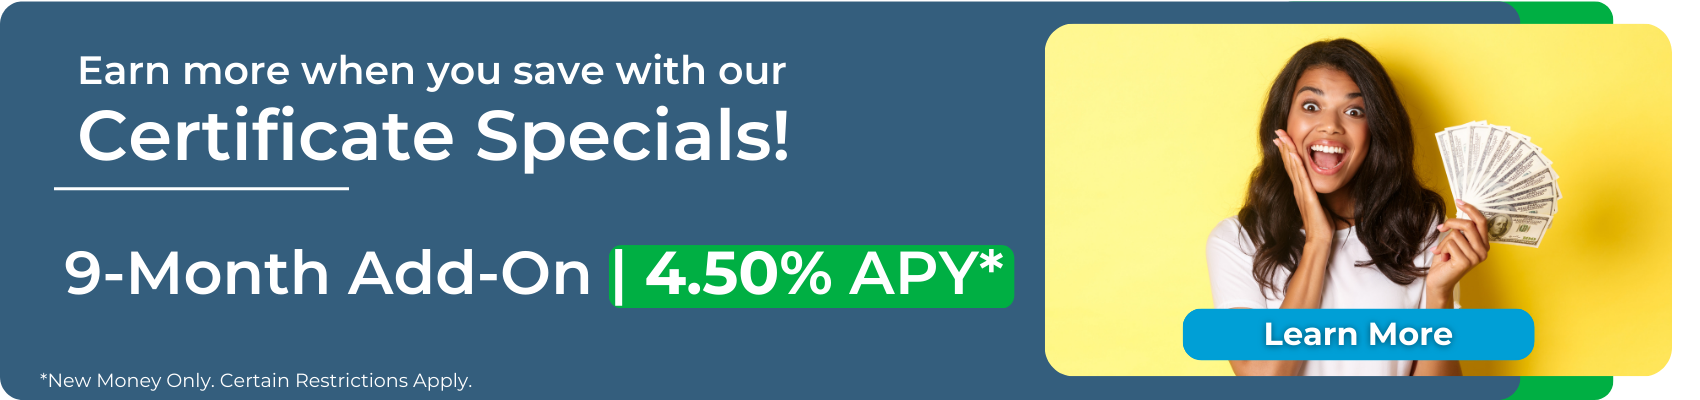 Earn more when you save with our Certificate Specials! 9-month add on at 4.50% APY*. Click to learn more and apply. Certain restrictions apply. New money only.